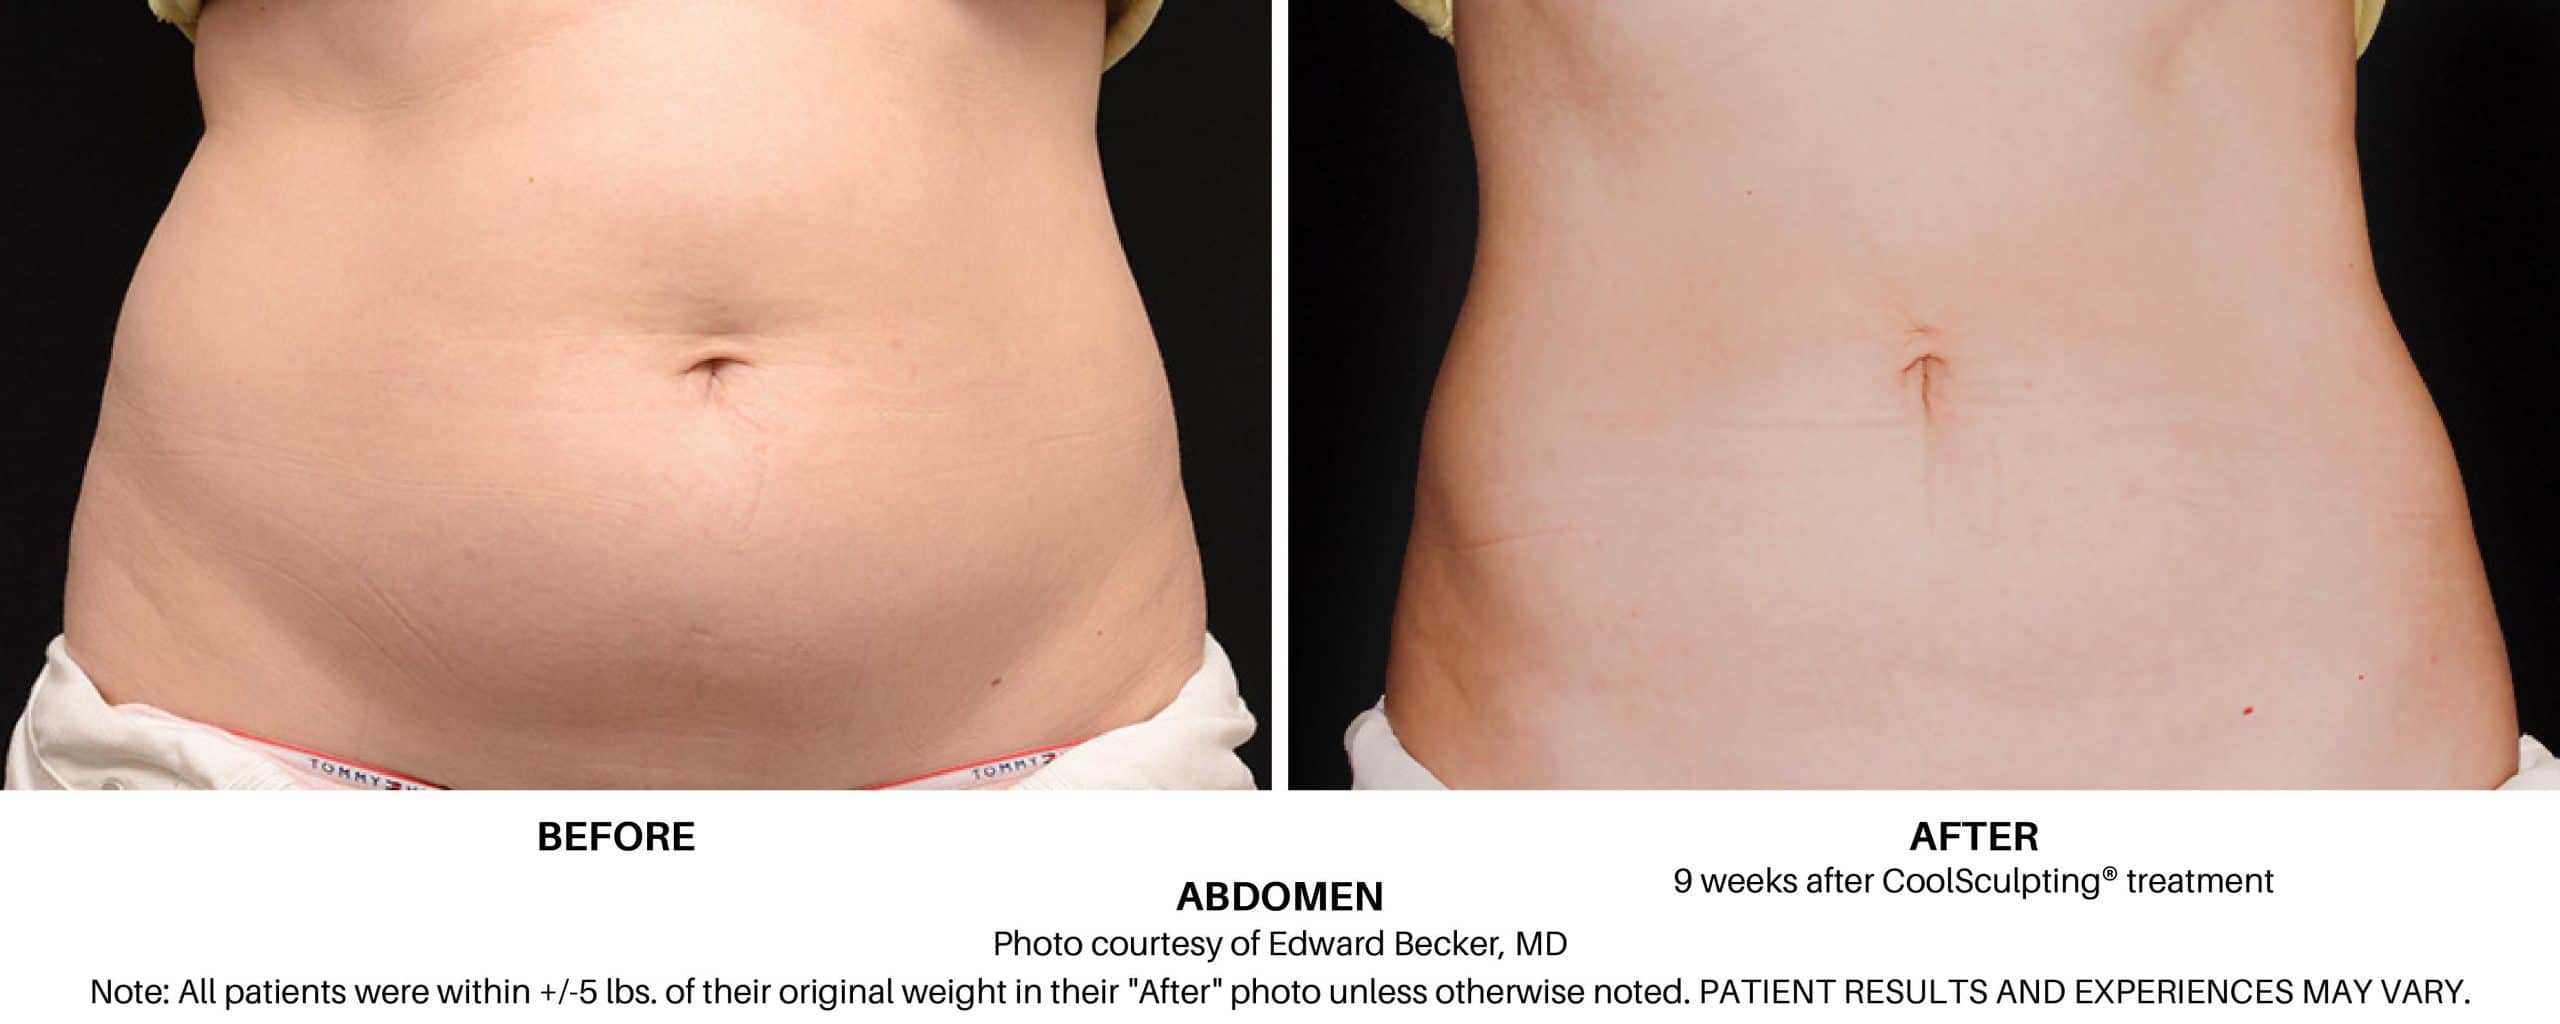 CoolSculpting Elite Before and After Pictures Proof Fat Freezing Works